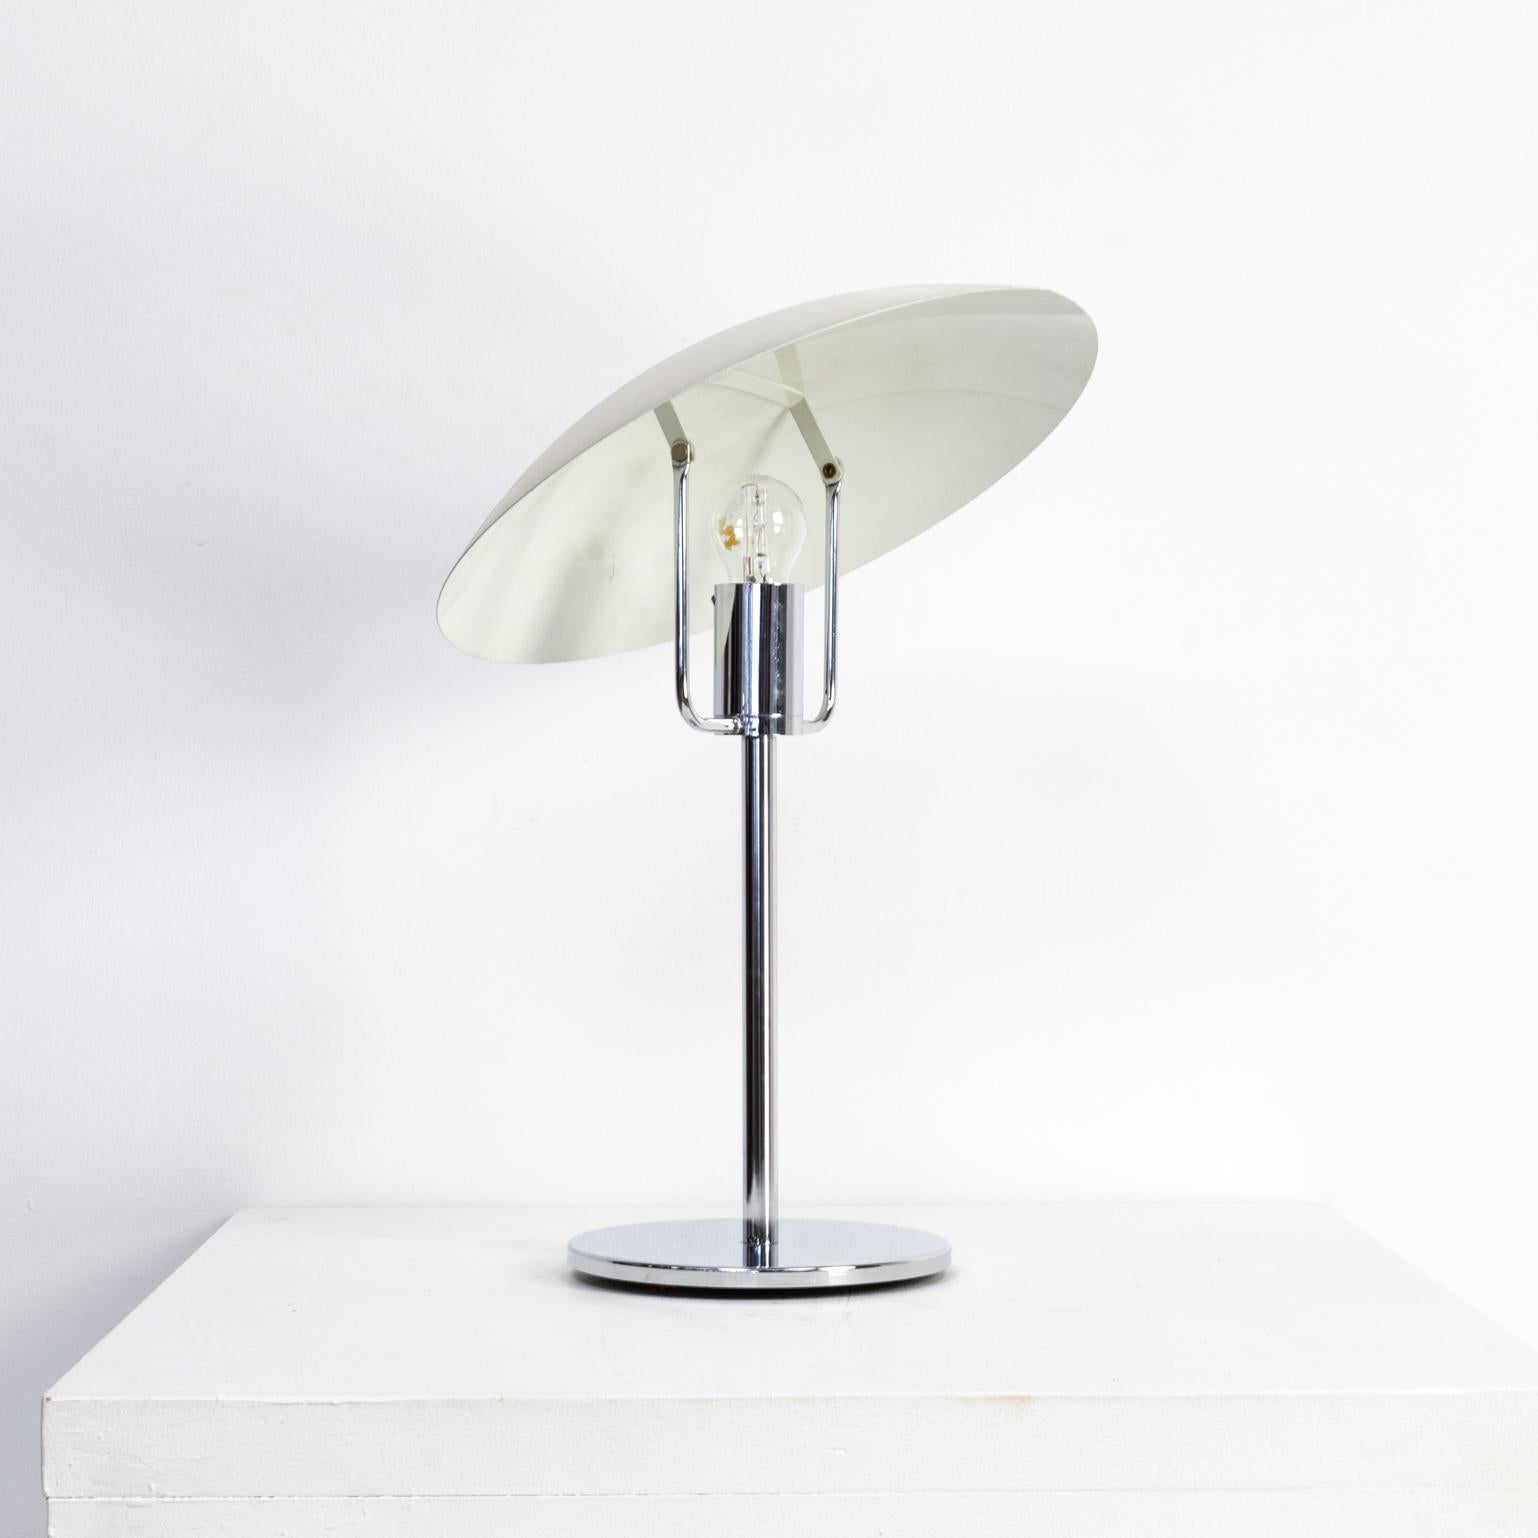 1970s Chrome and Metal Table Lamp for SCE im Zustand „Gut“ im Angebot in Amstelveen, Noord